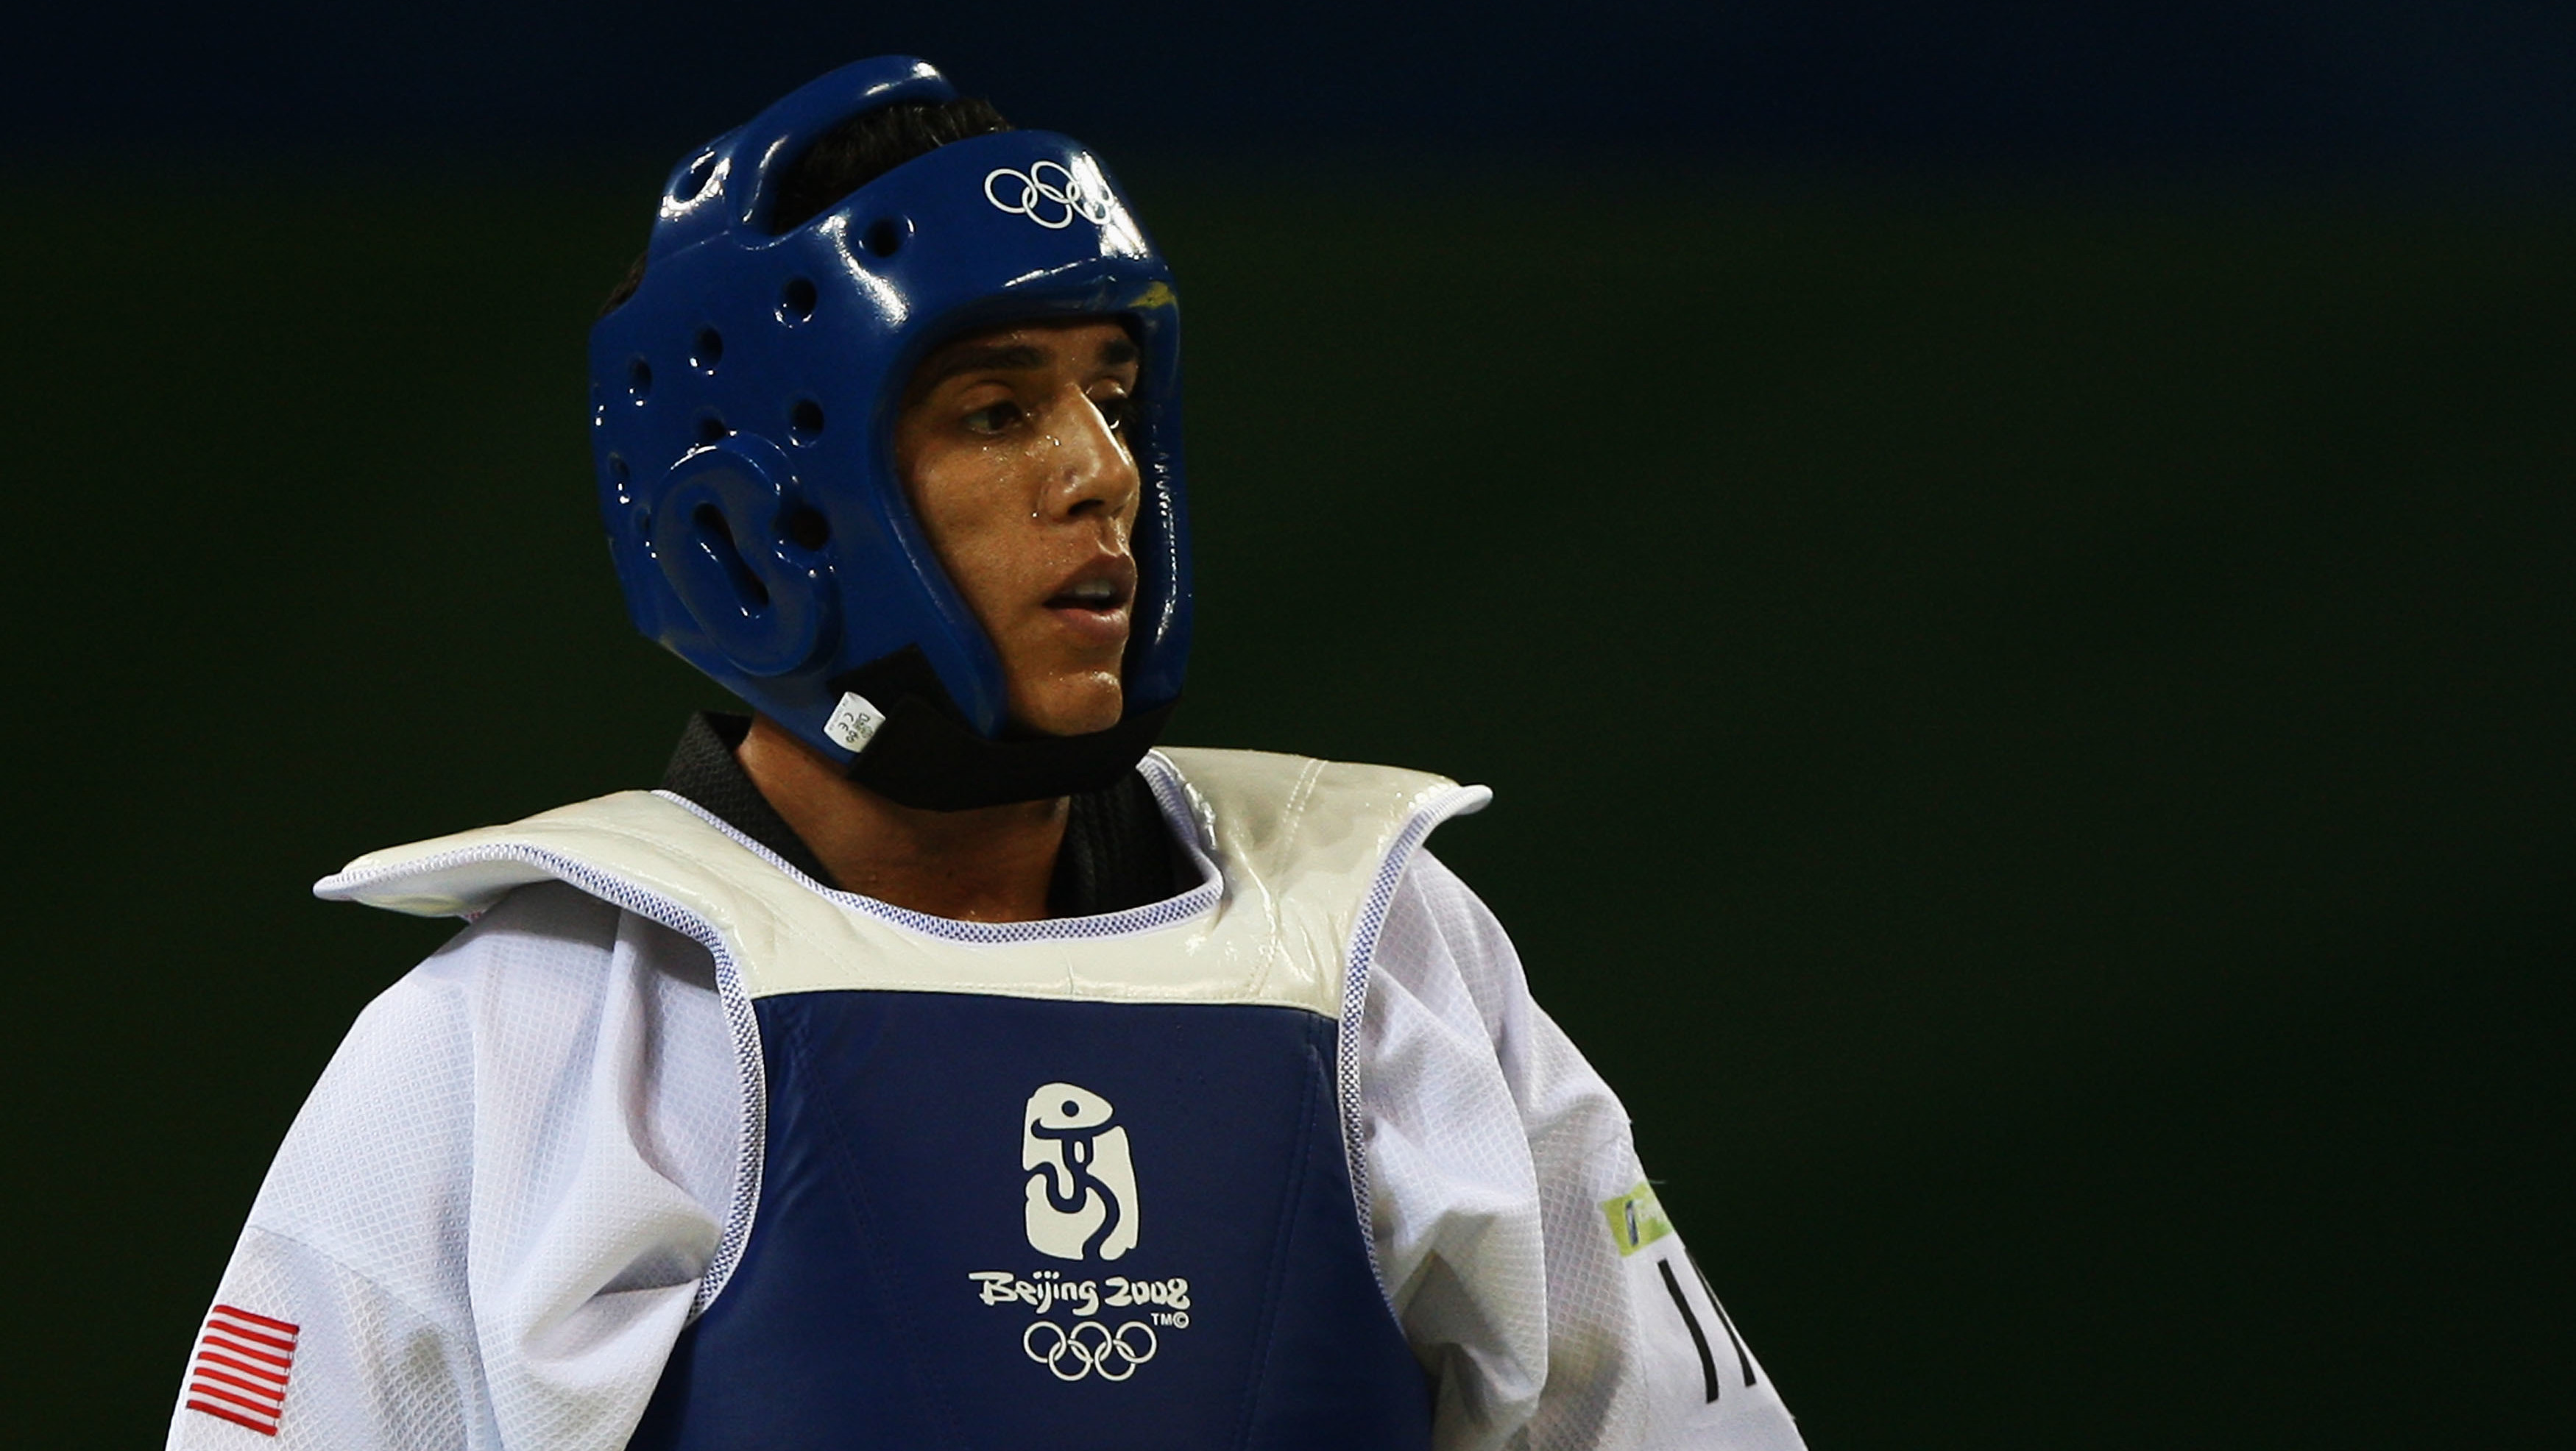 Decorated Taekwondo Athlete Steven Lopez Temporarily Barred Amid Assault Claims